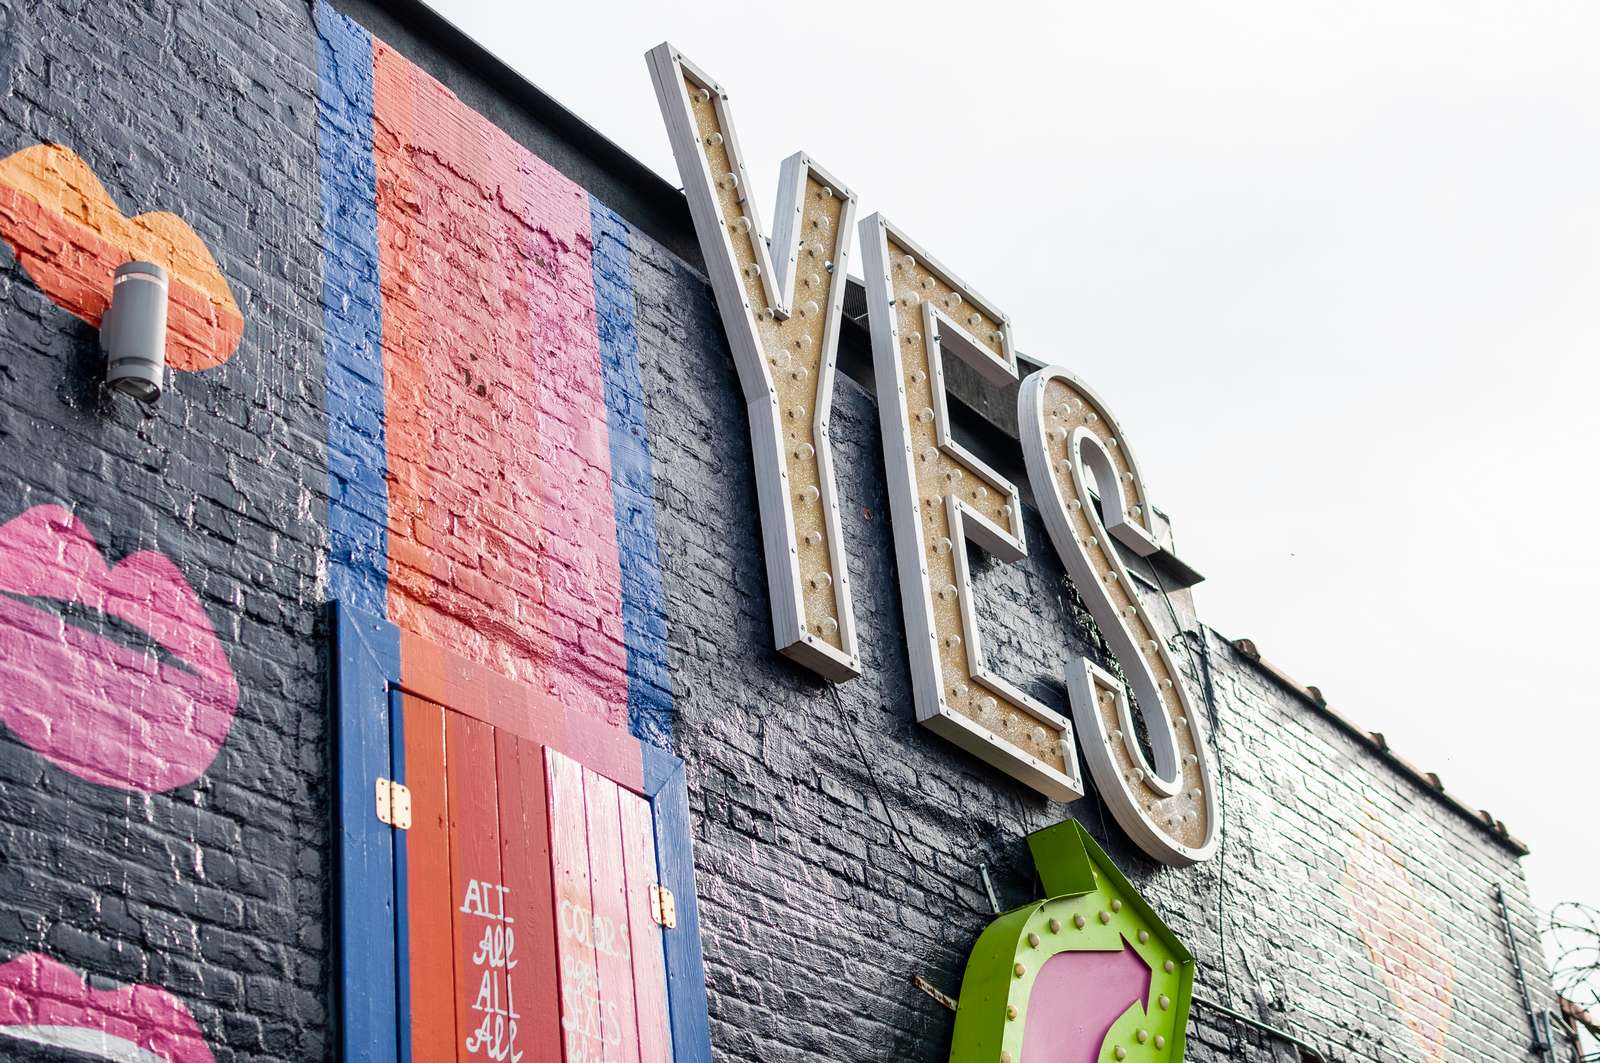 YES neon sign on painted brick exterior